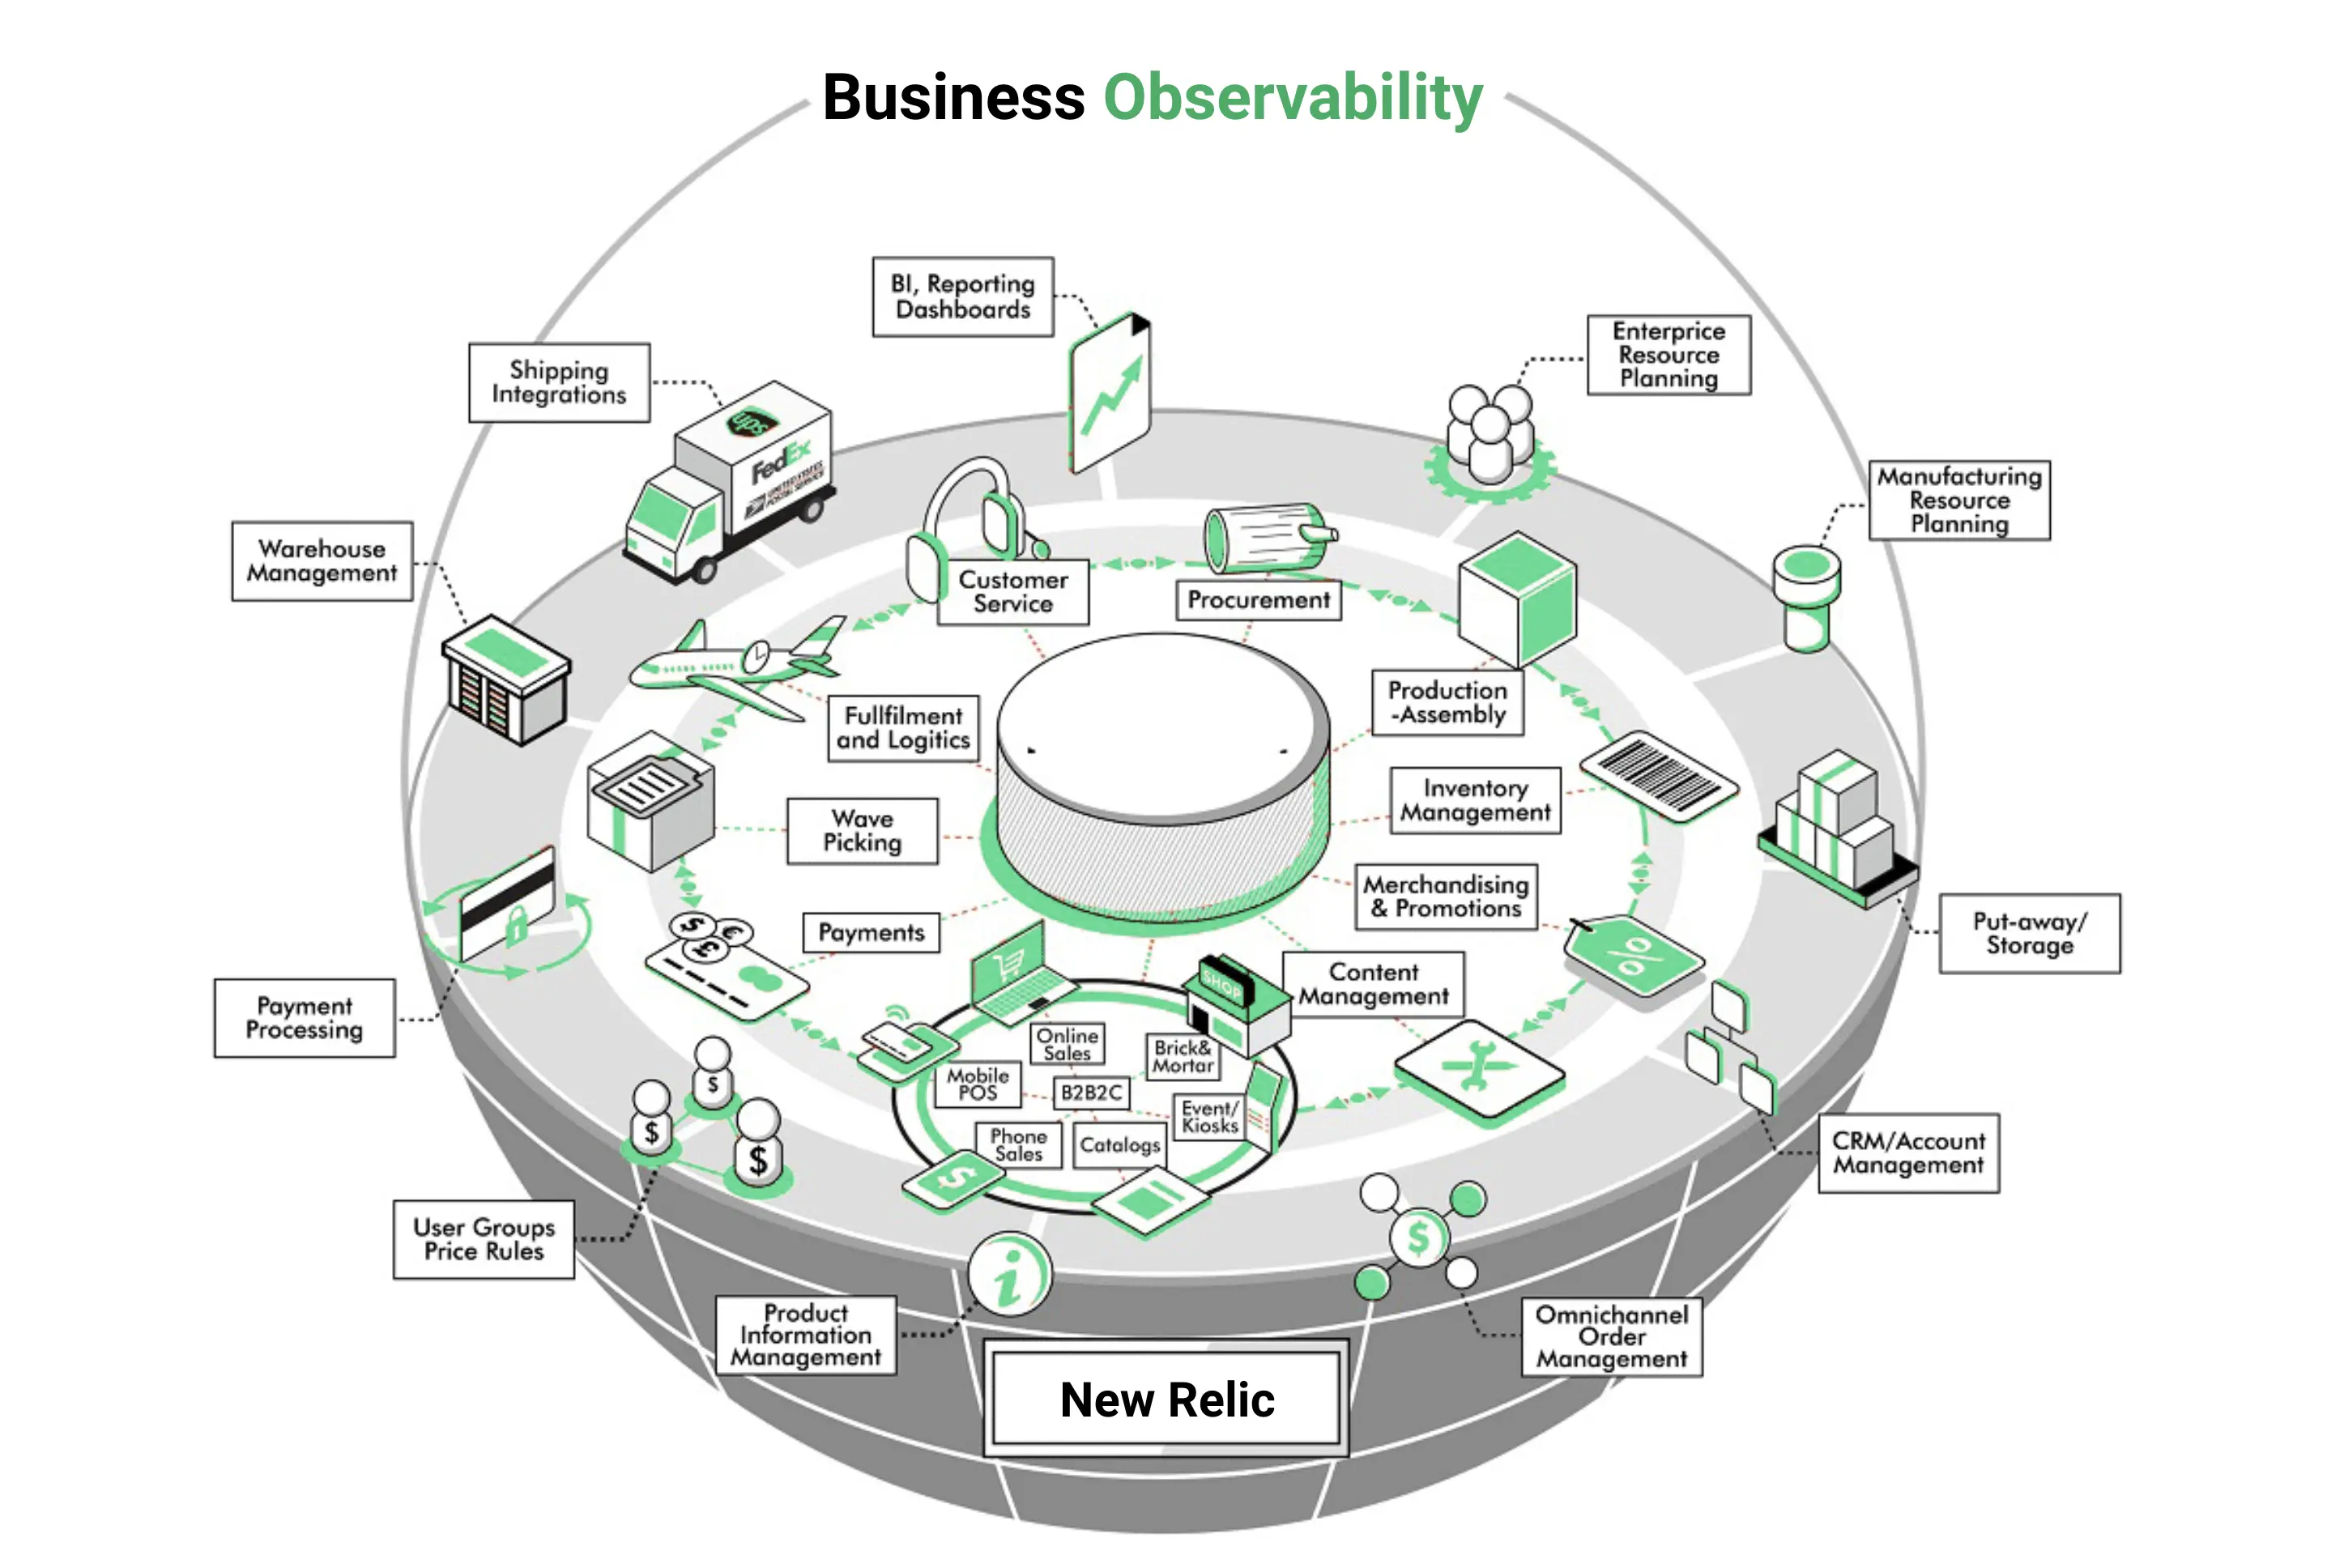 Business observability overview